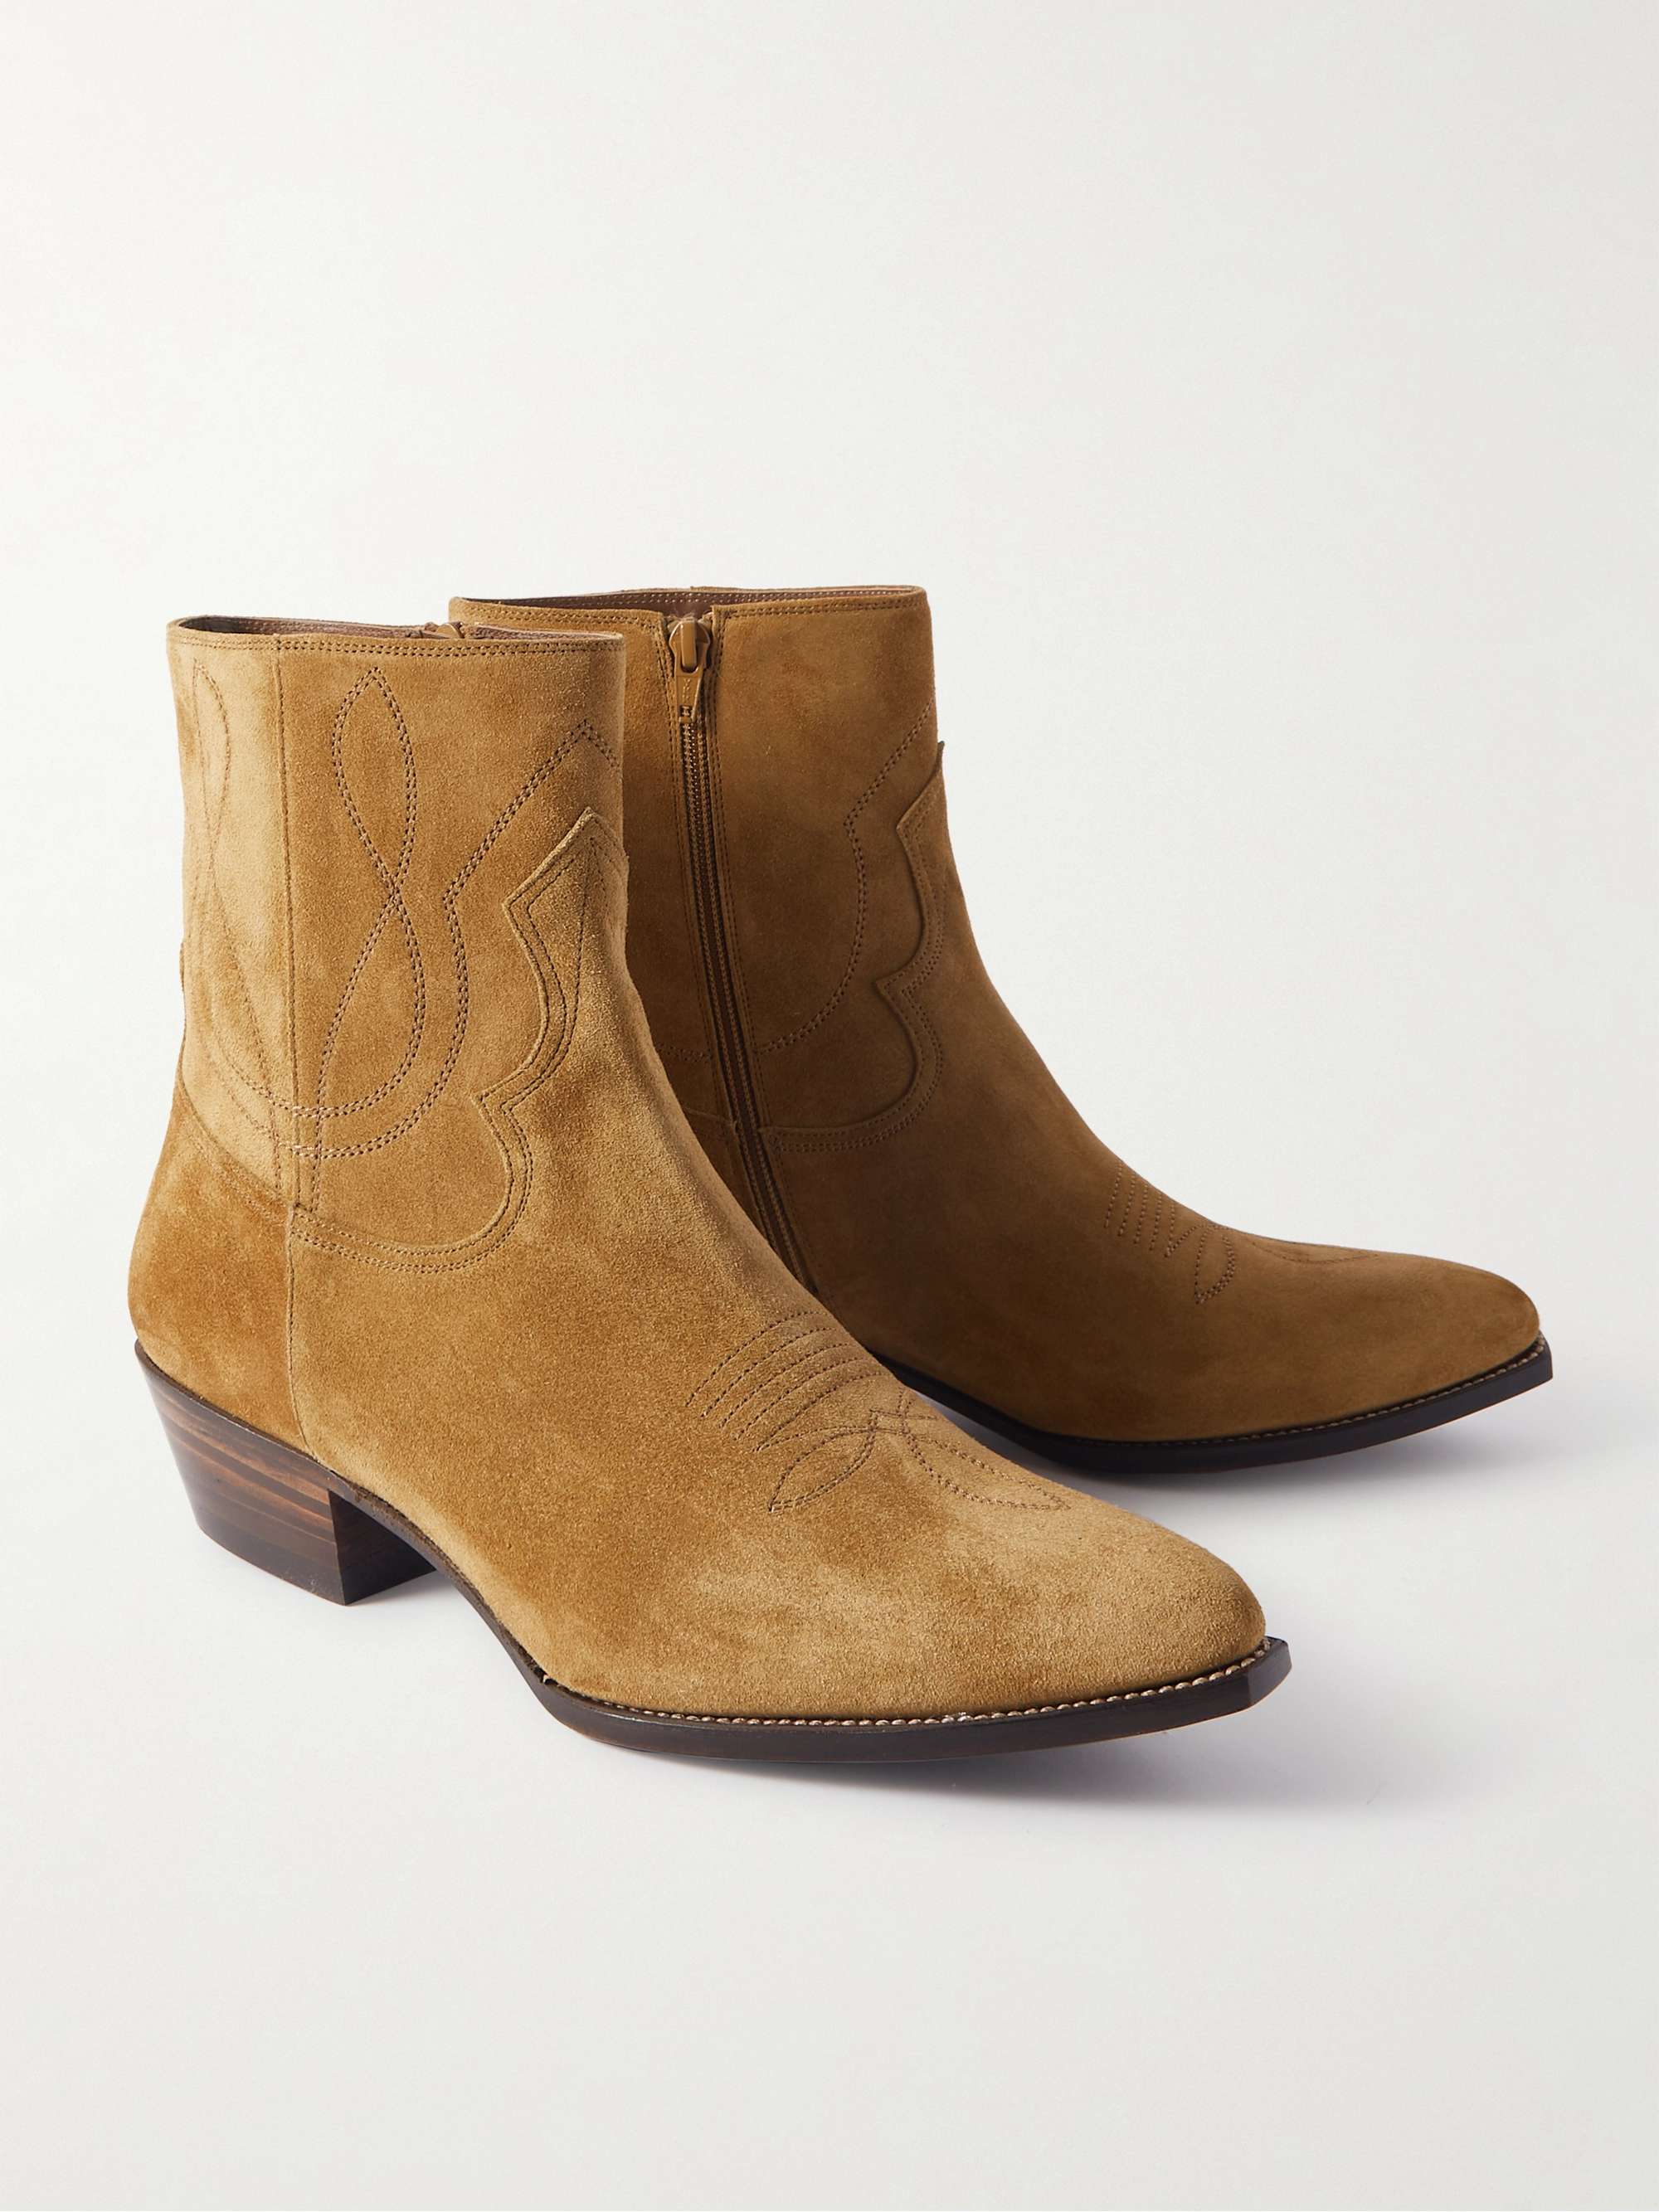 CELINE HOMME Moon Embroidered Suede Boots